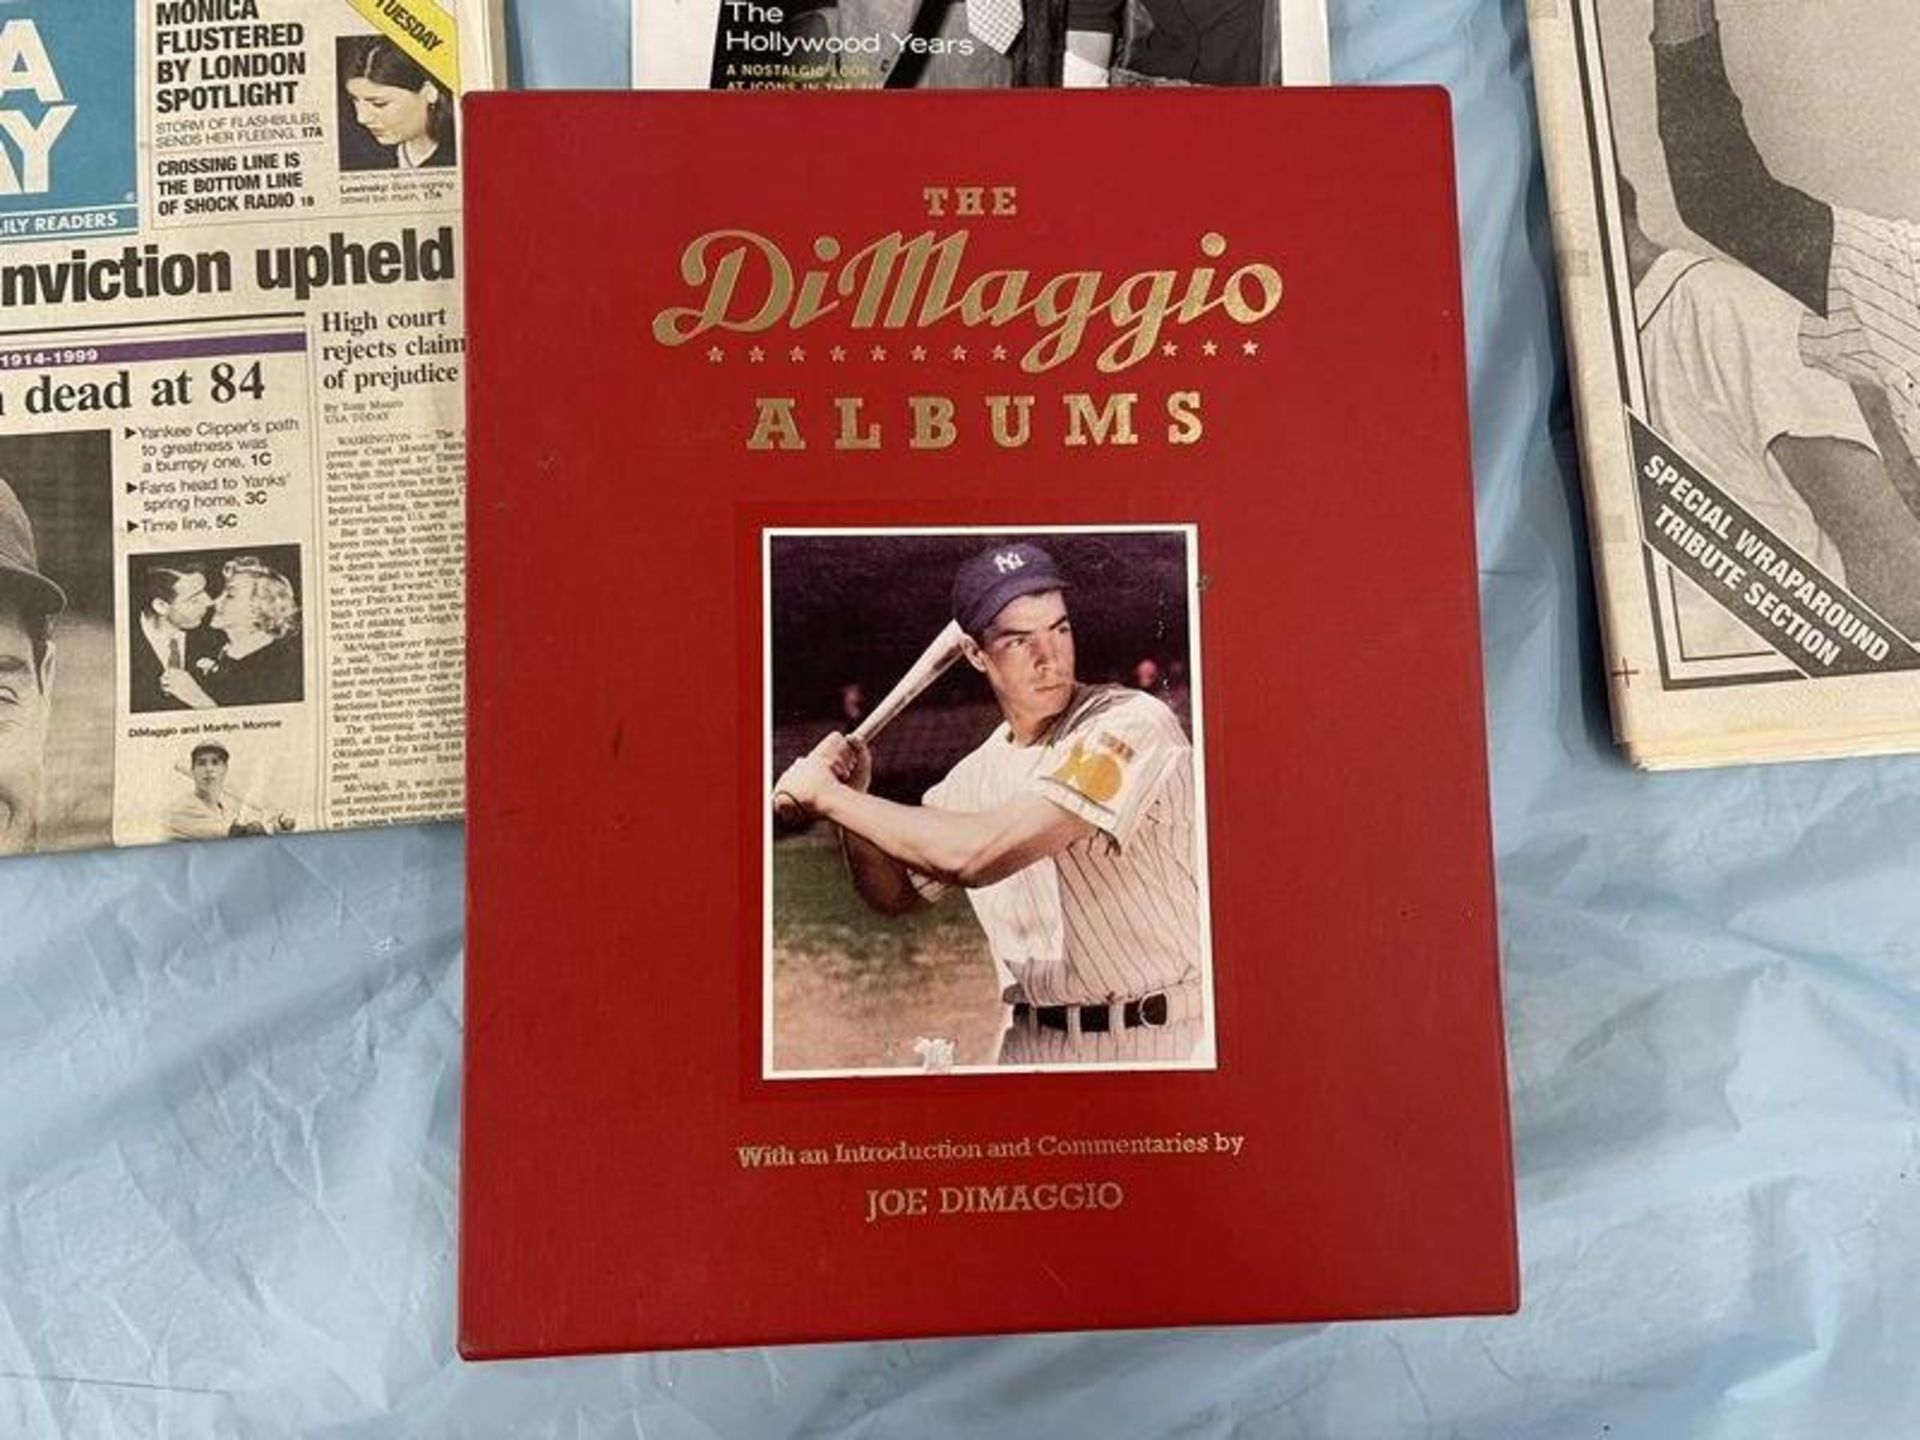 (Lot) Joe DiMaggio package c/o: never opened 2 volume album in case, (2) newspapers - Image 2 of 3